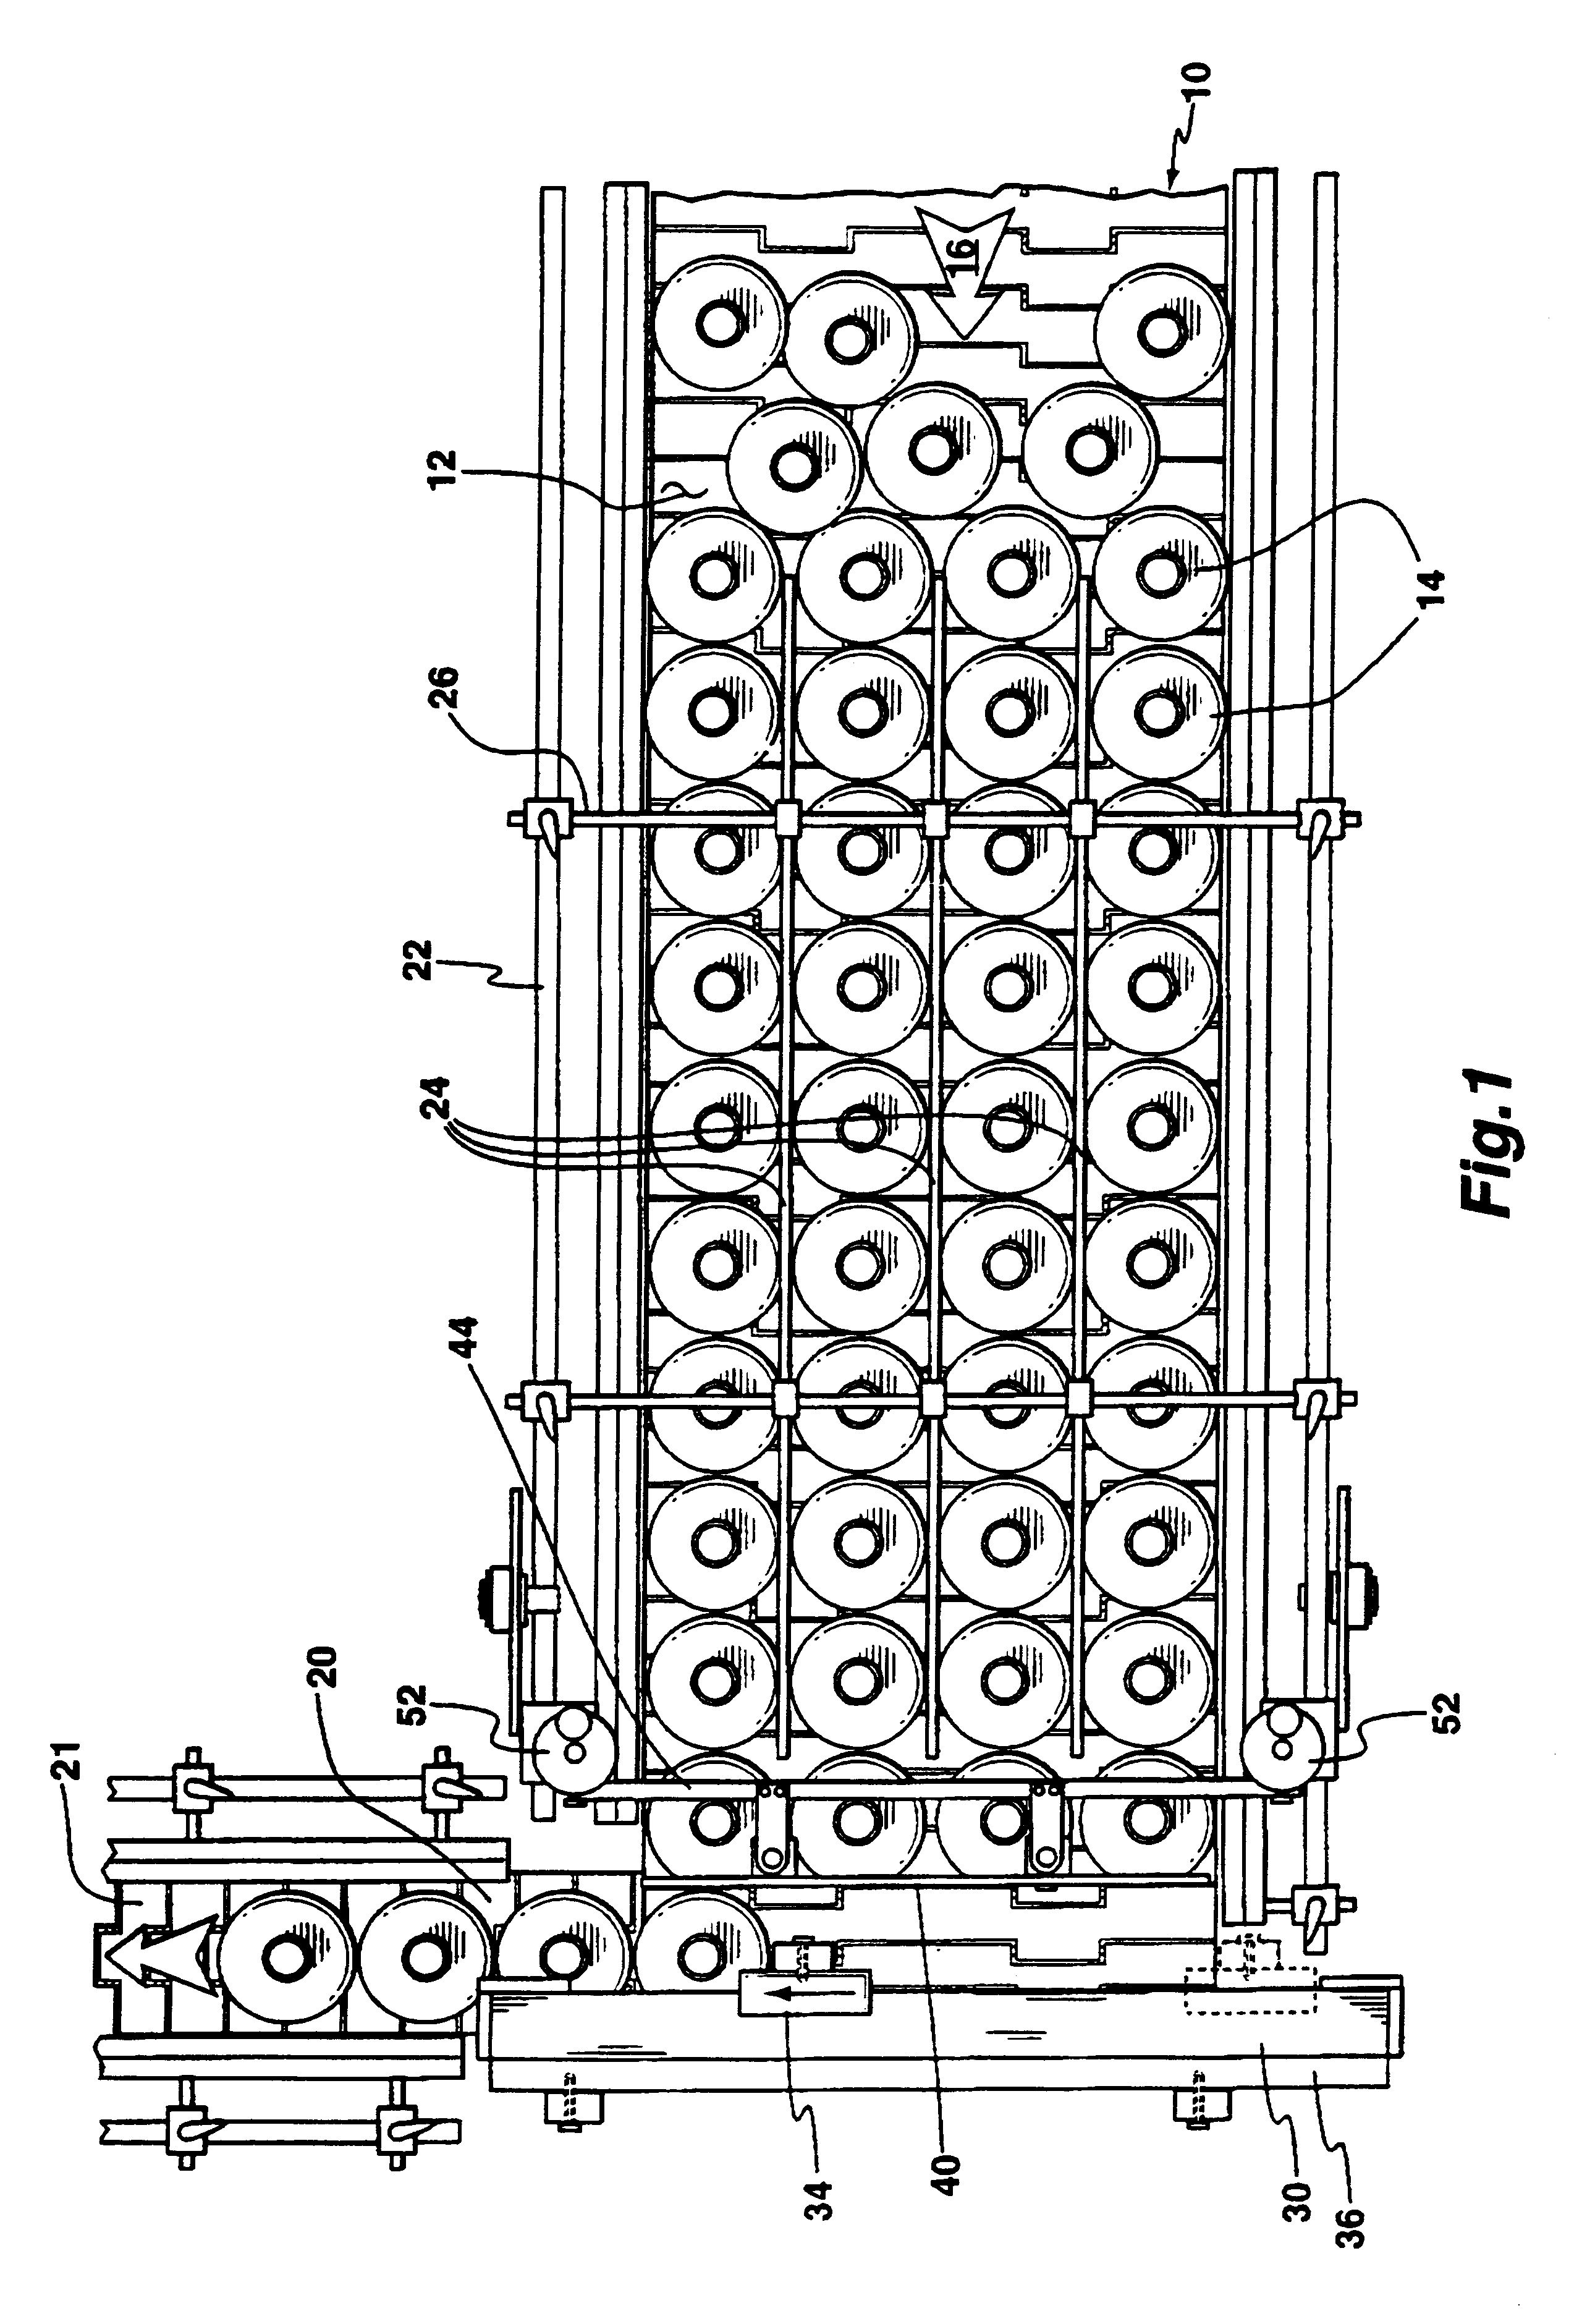 Method and apparatus for feeding containers in serial order on a conveyor belt